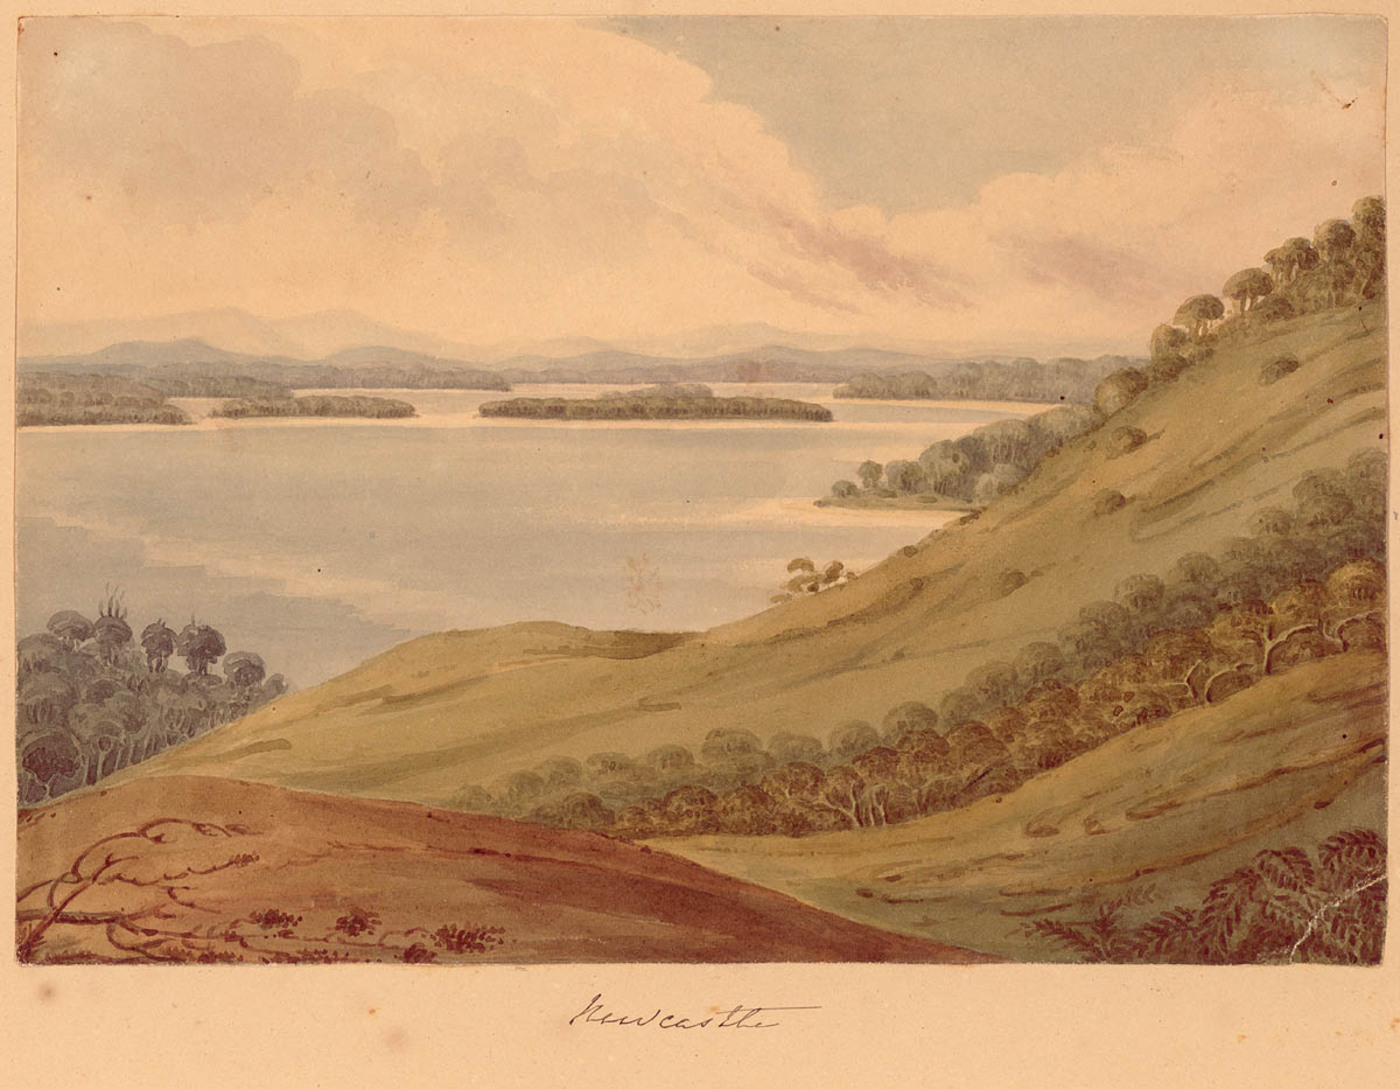 Newcastle - watercolour by Edward Charles Close (1844) Courtesy of the State Library of NSW